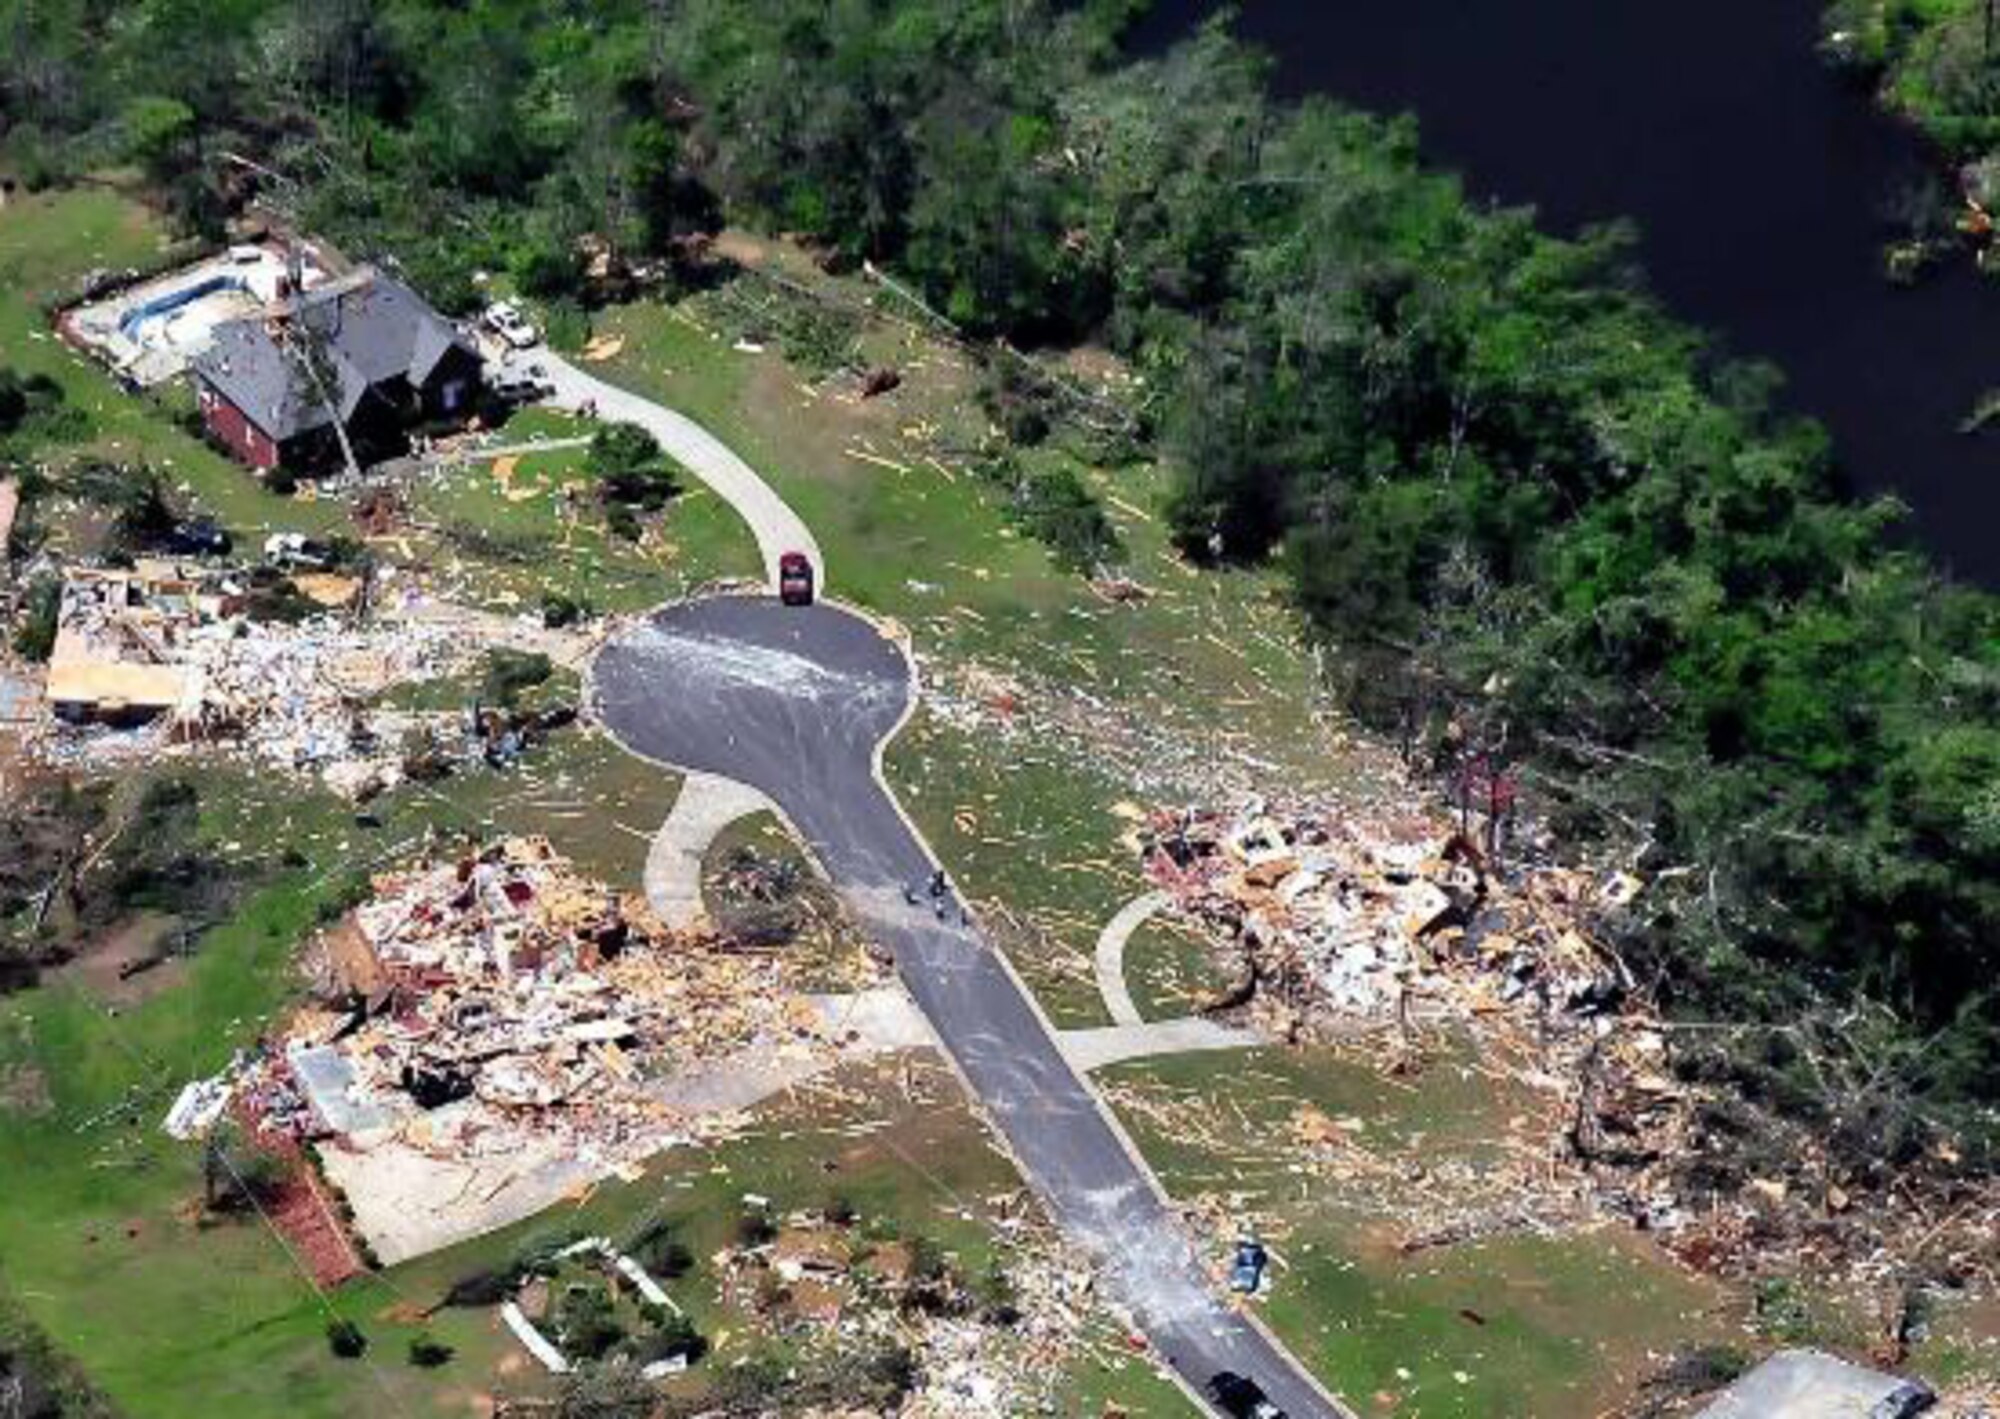 A Civil Air Patrol aircrew took this image April 29, 2011, in Jefferson County, Alabama. Members of the CAP are flying in support of first responders and state and local officials as they assess tornado damage to the region. (Courtesy photo)
